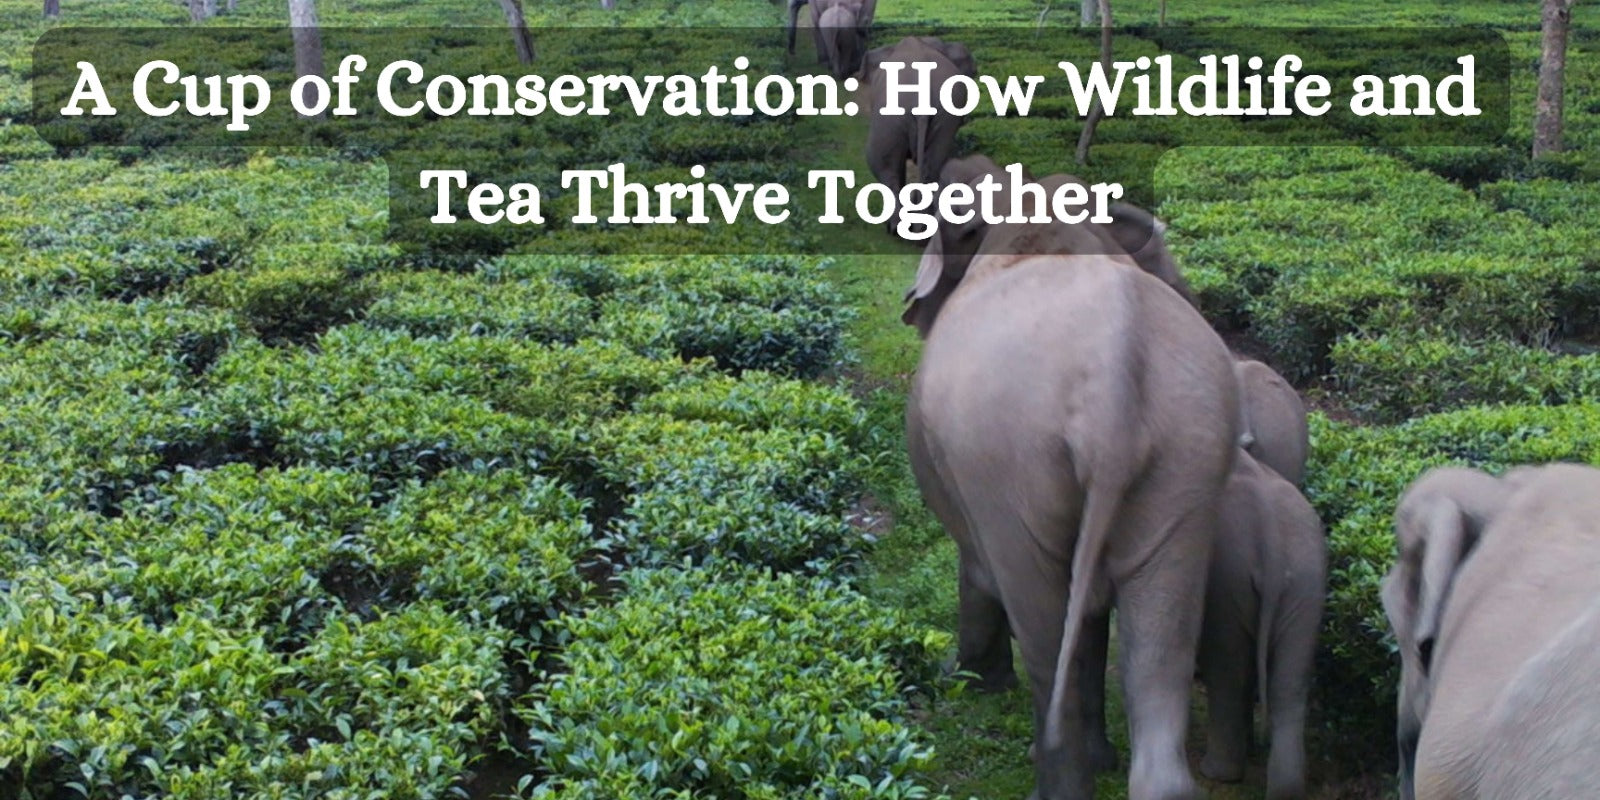 A Cup of Conservation: How Wildlife and Tea Thrive Together